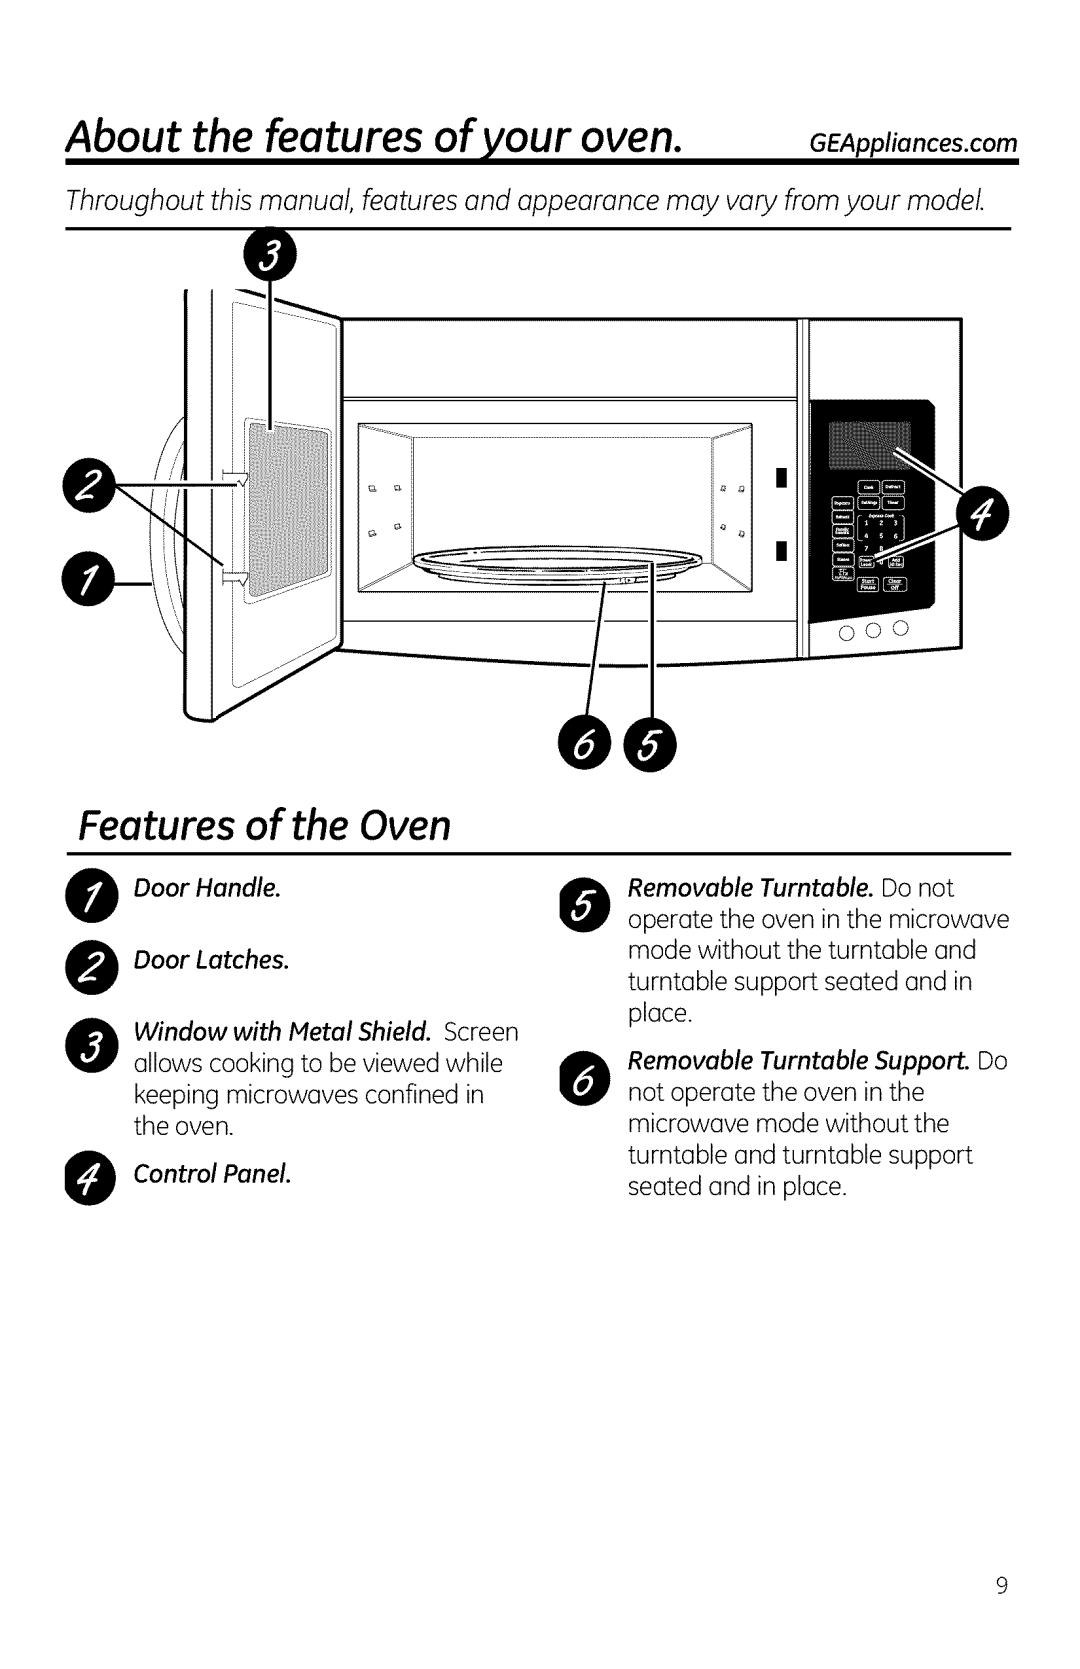 GE DVM1950, JVM1950, JNM1951 manual About the features of your oven, Features of the Oven 